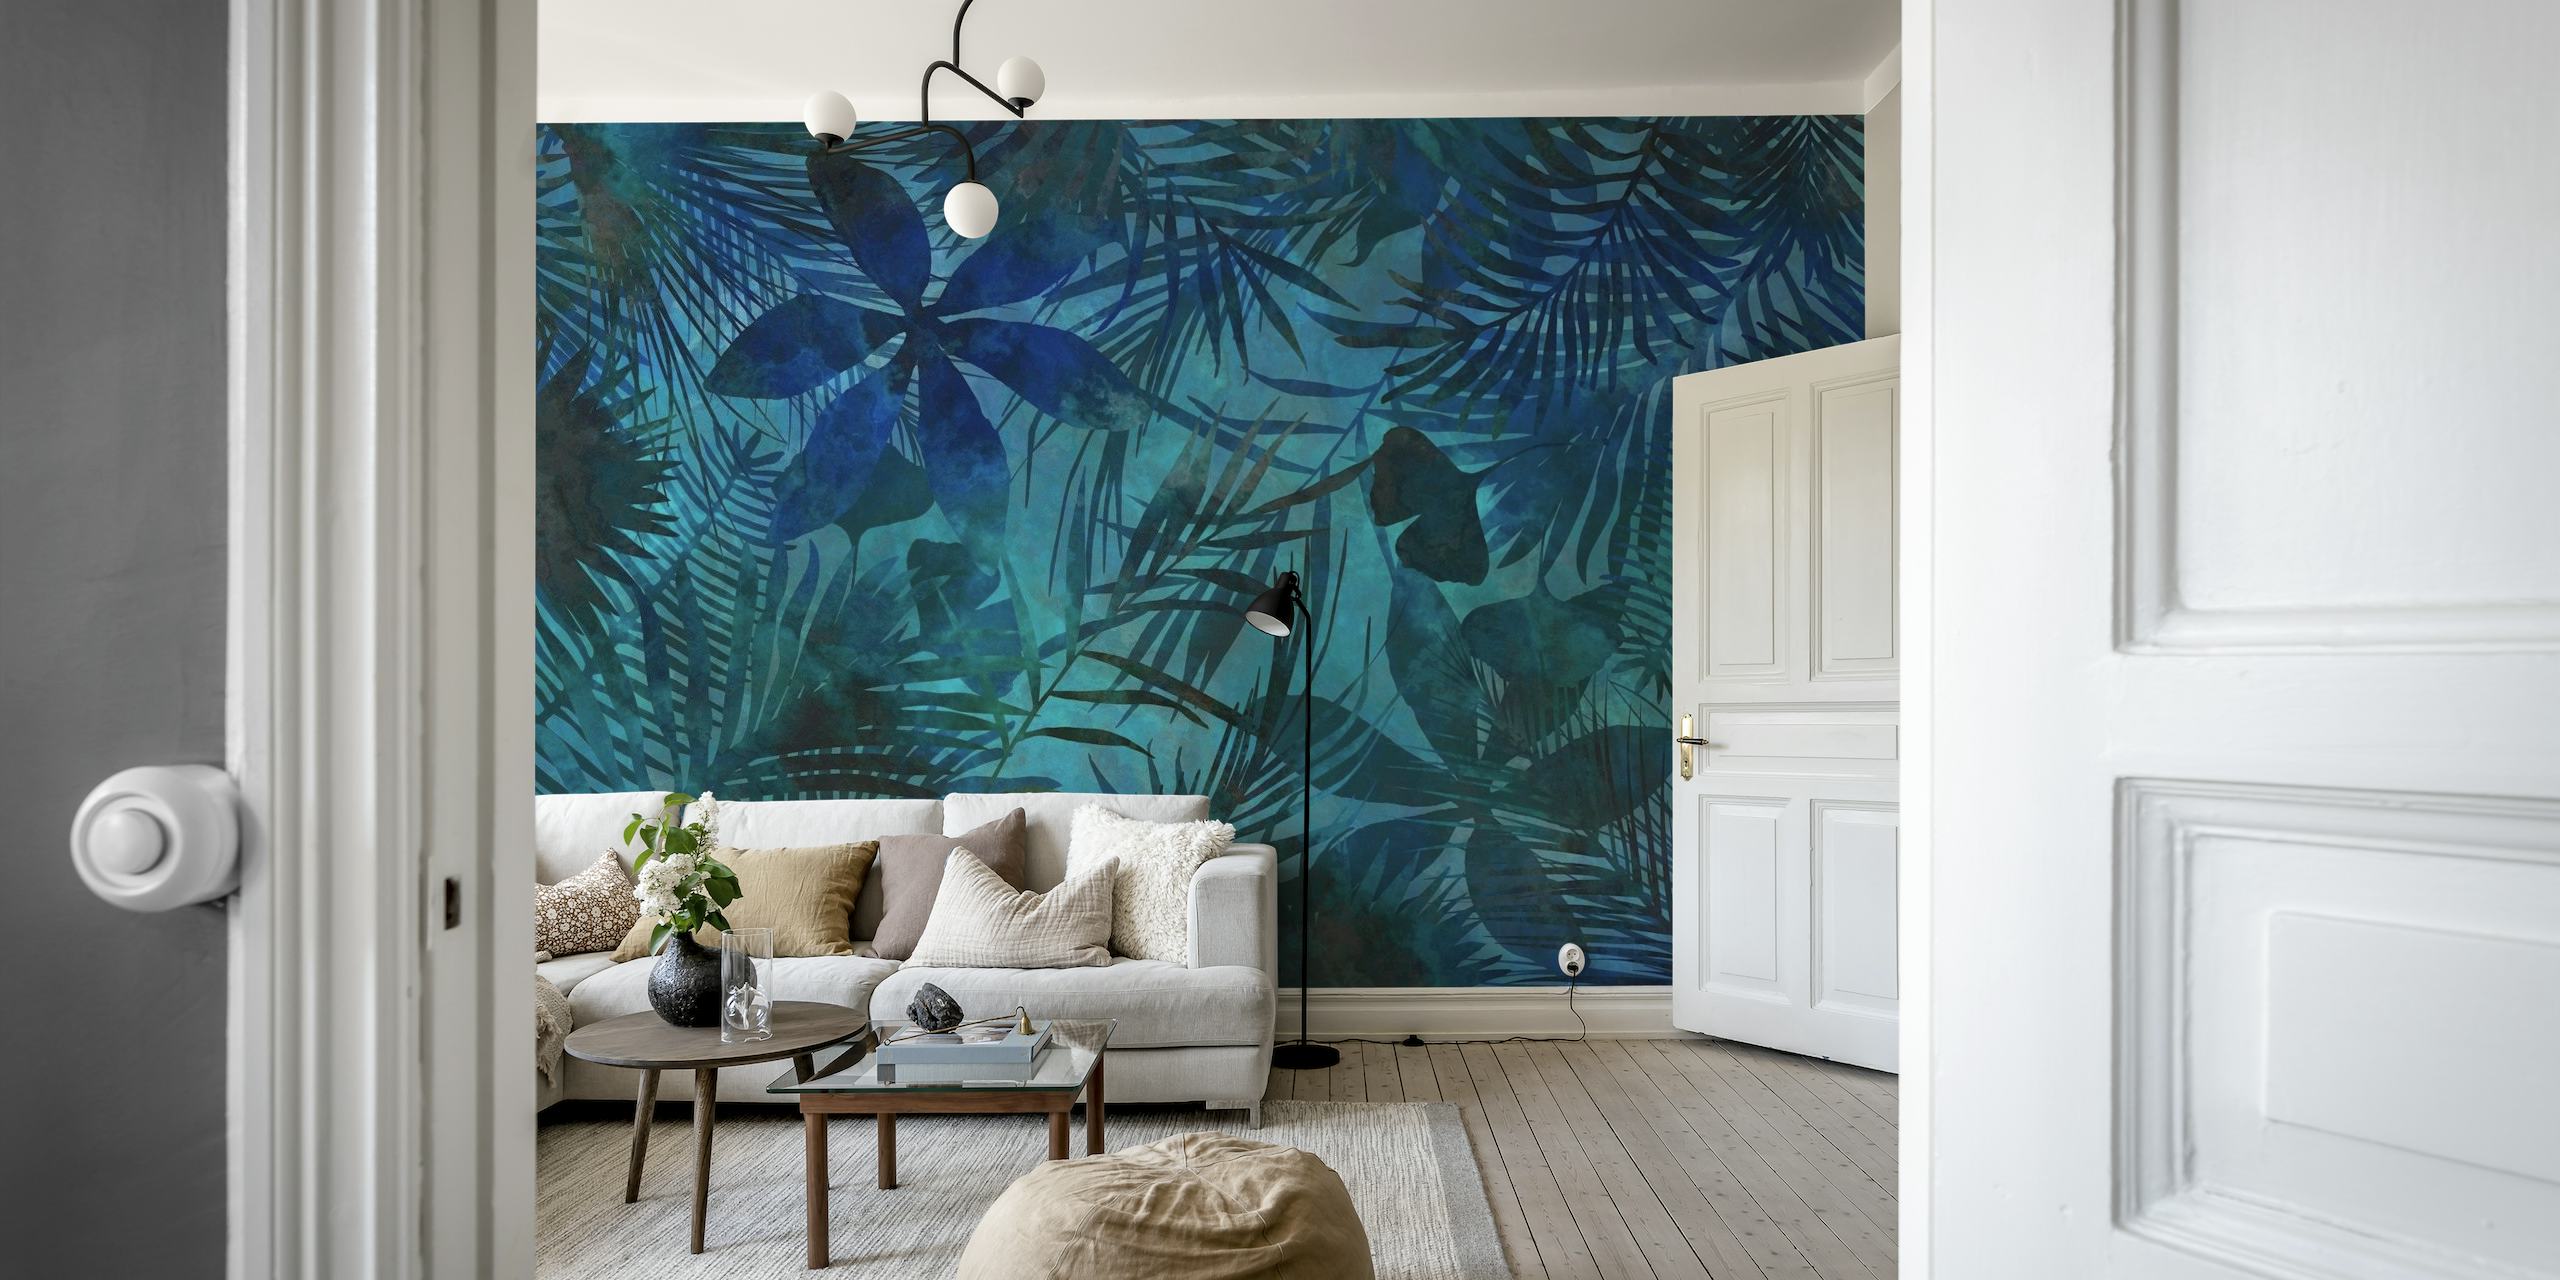 Intriguing Dark Blue and Teal Tropical Jungle Wallpaper